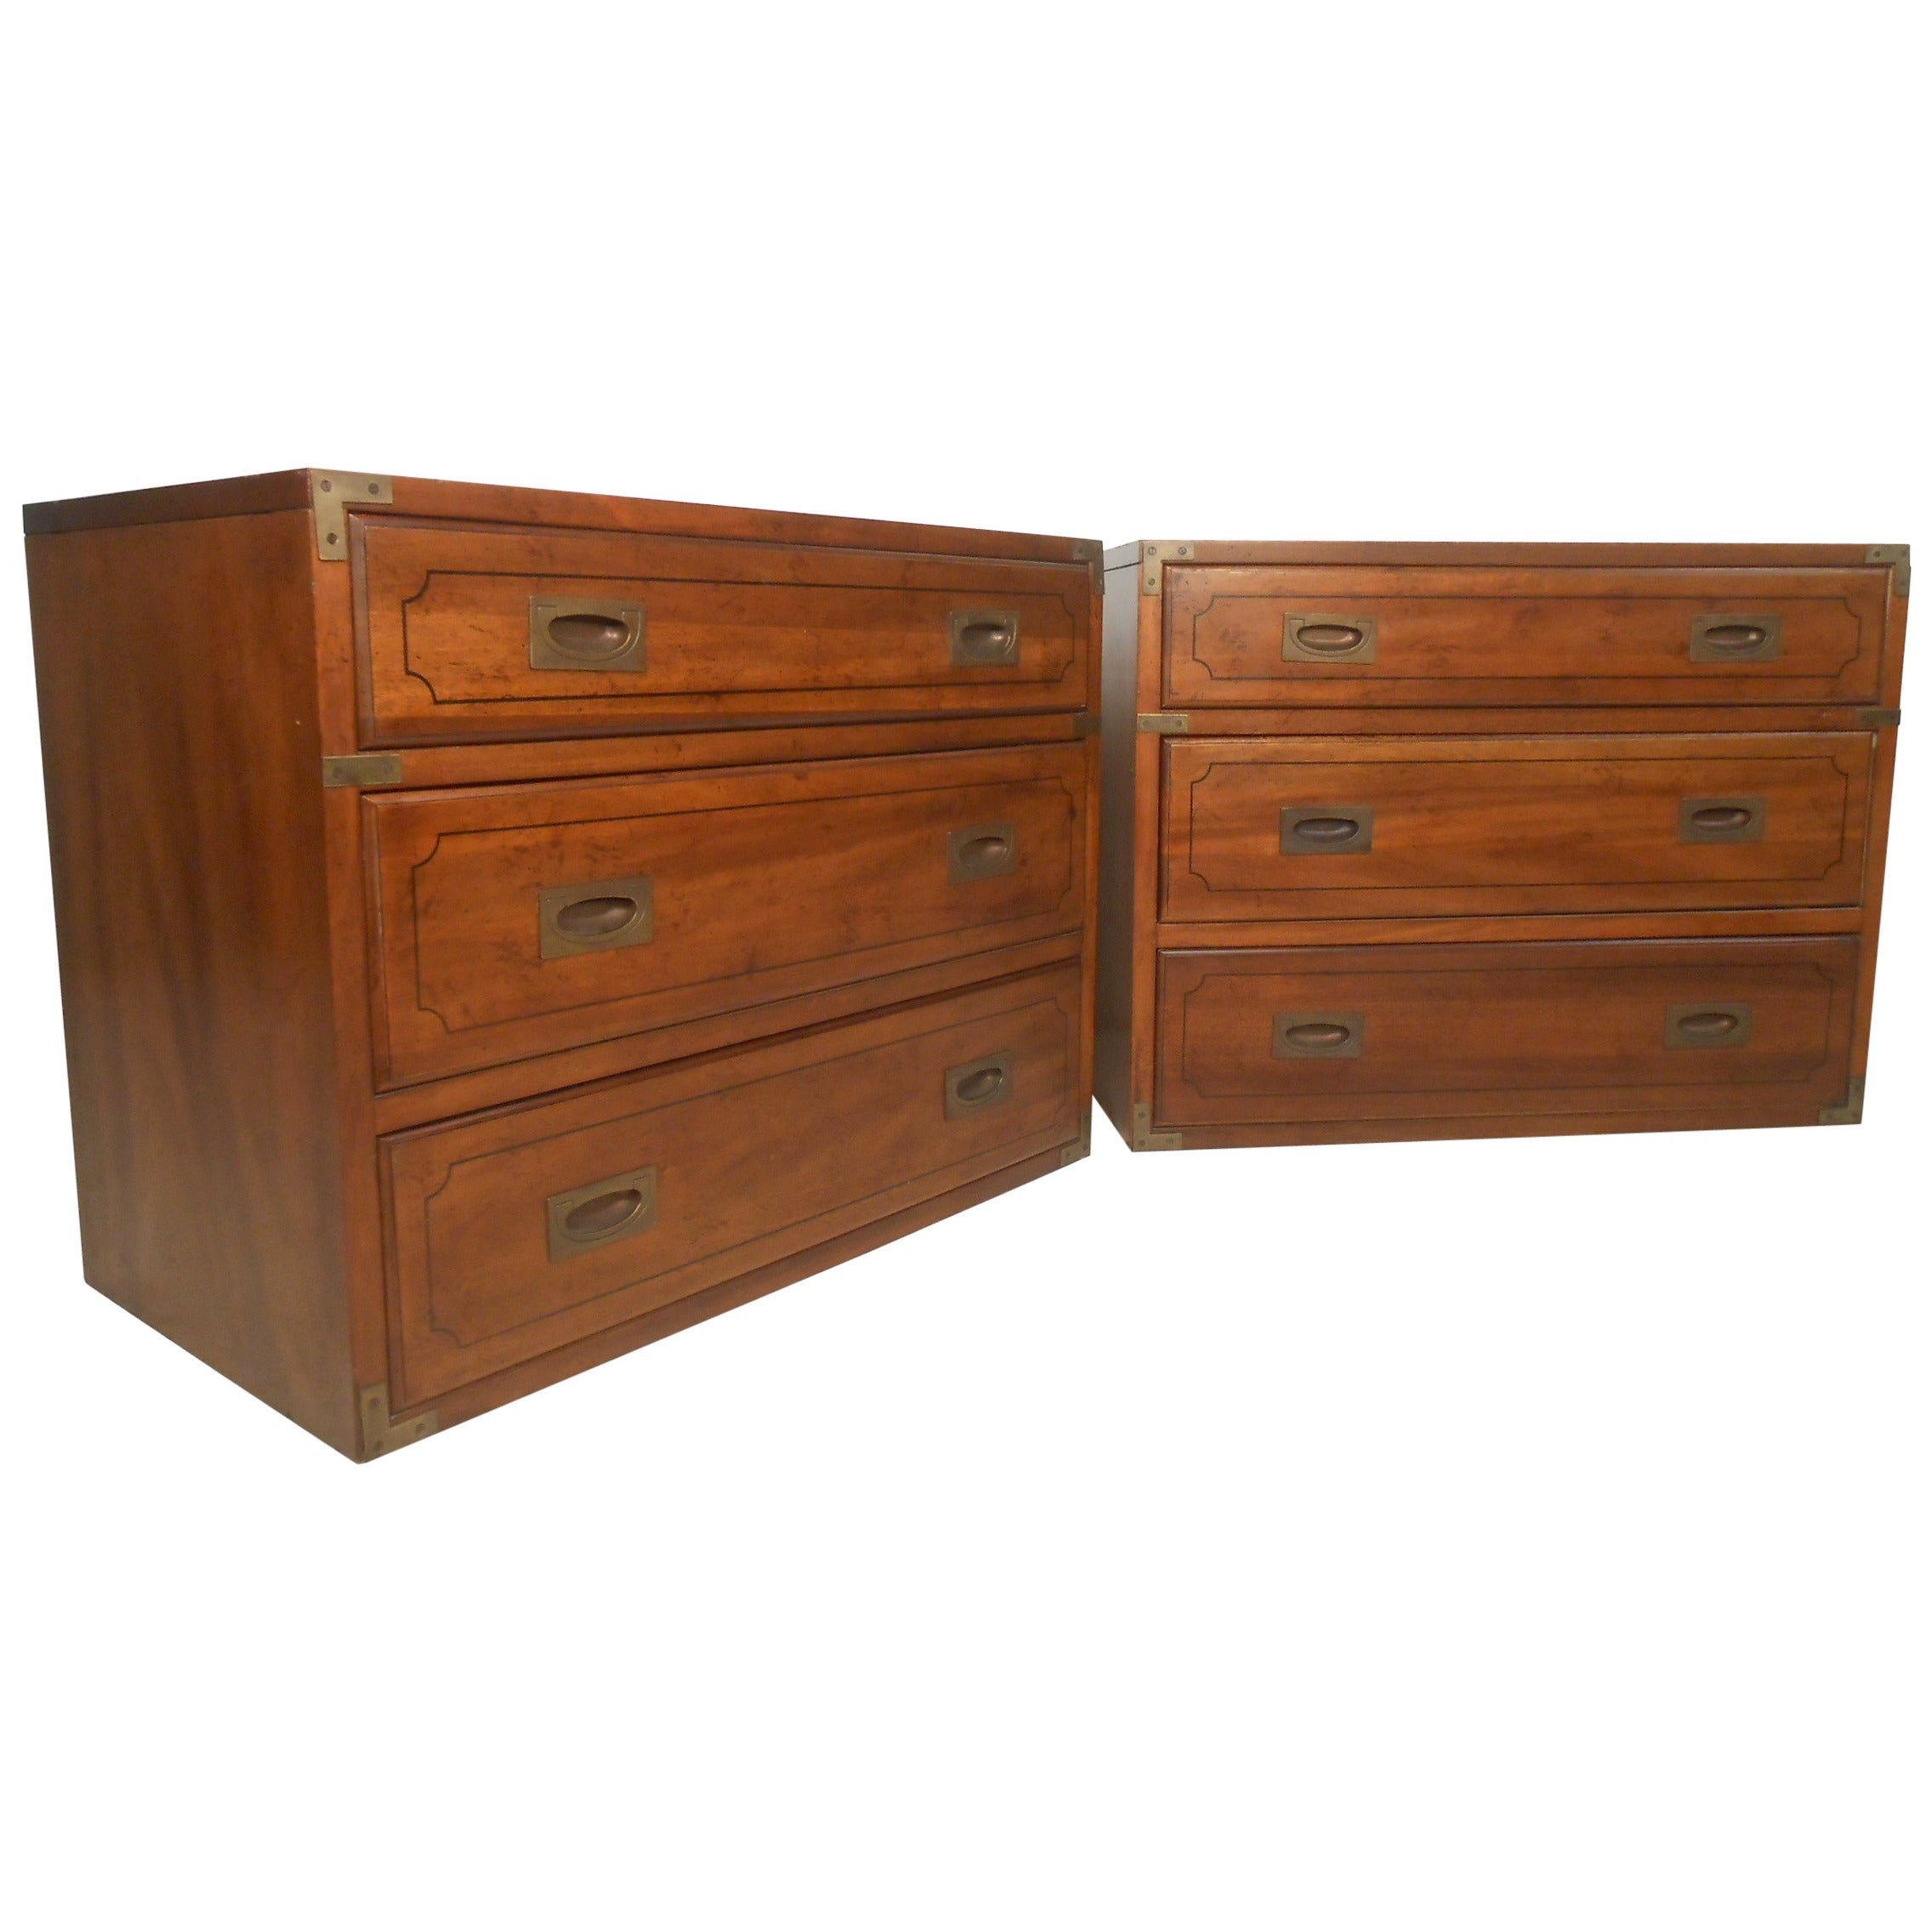 Pair of Campaign Chests by Globe Furniture